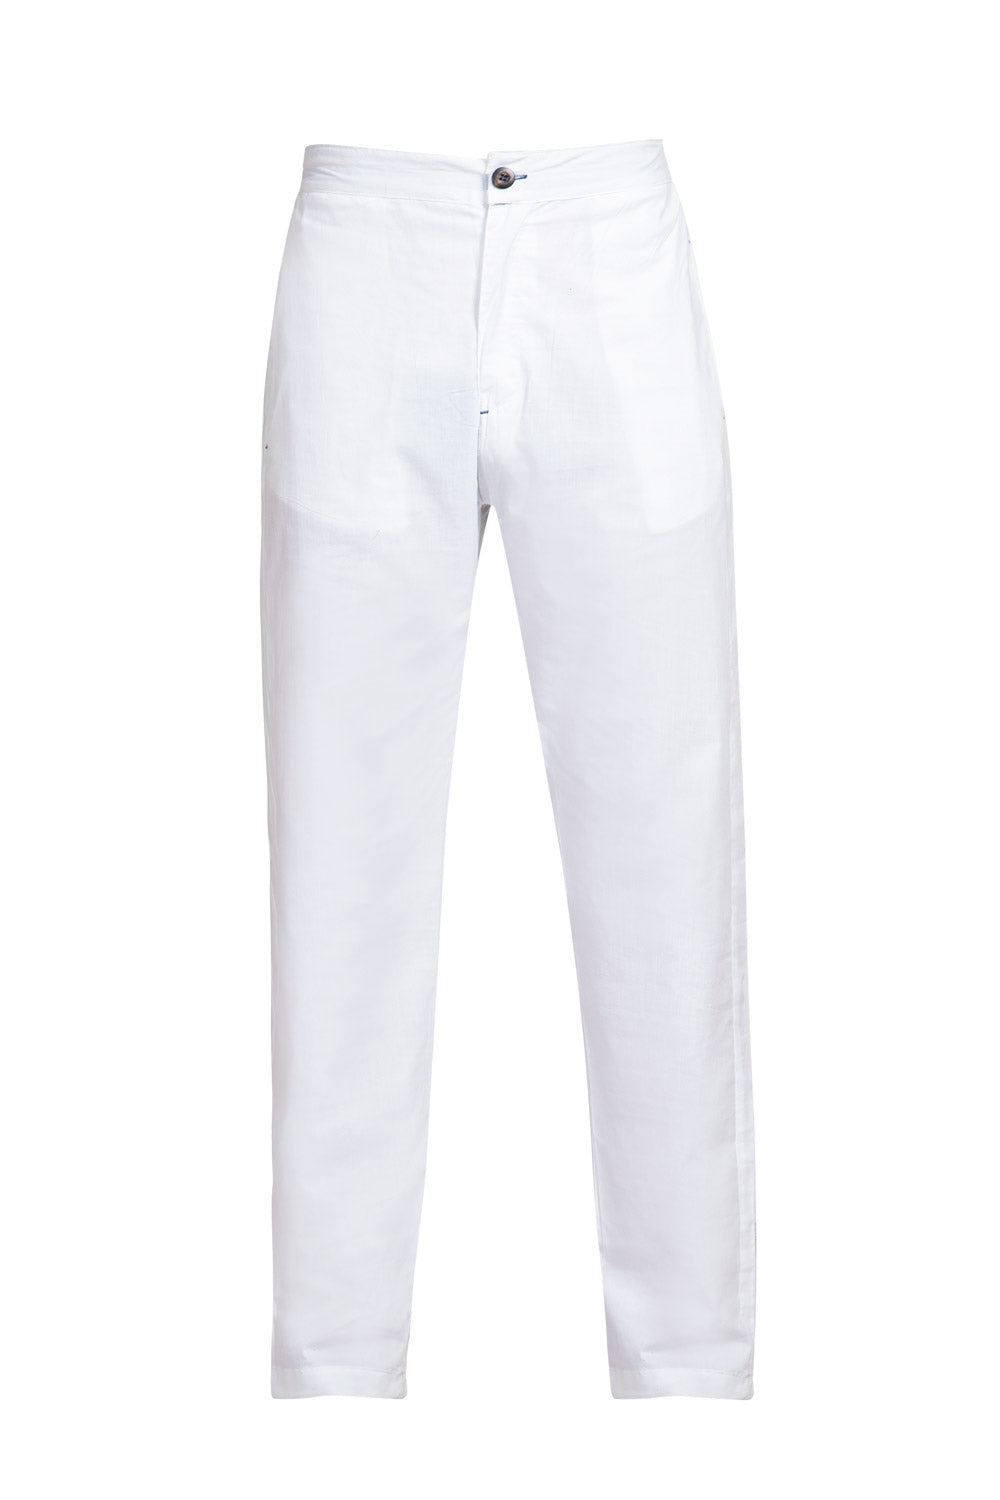 Essential White Trousers